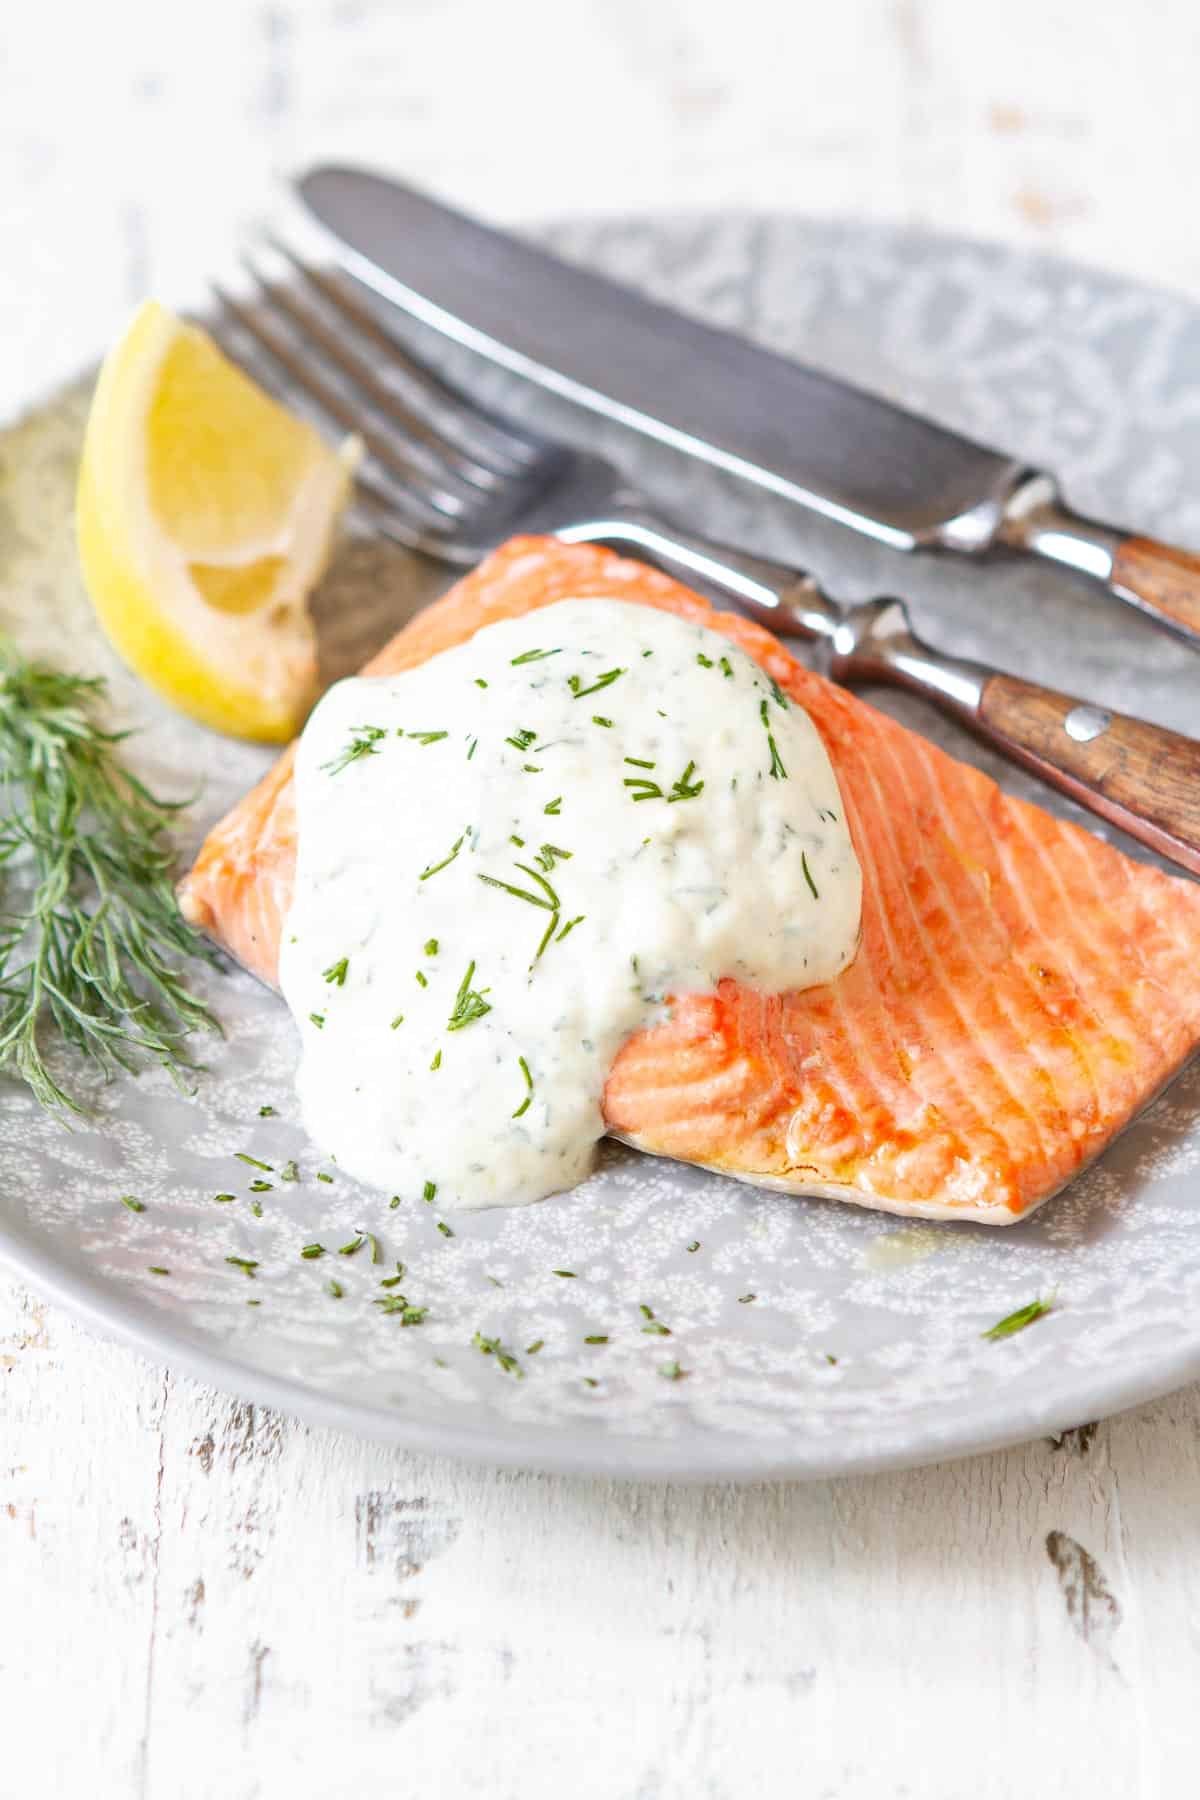 Poached salmon with a yogurt dill sauce on a gray plate.